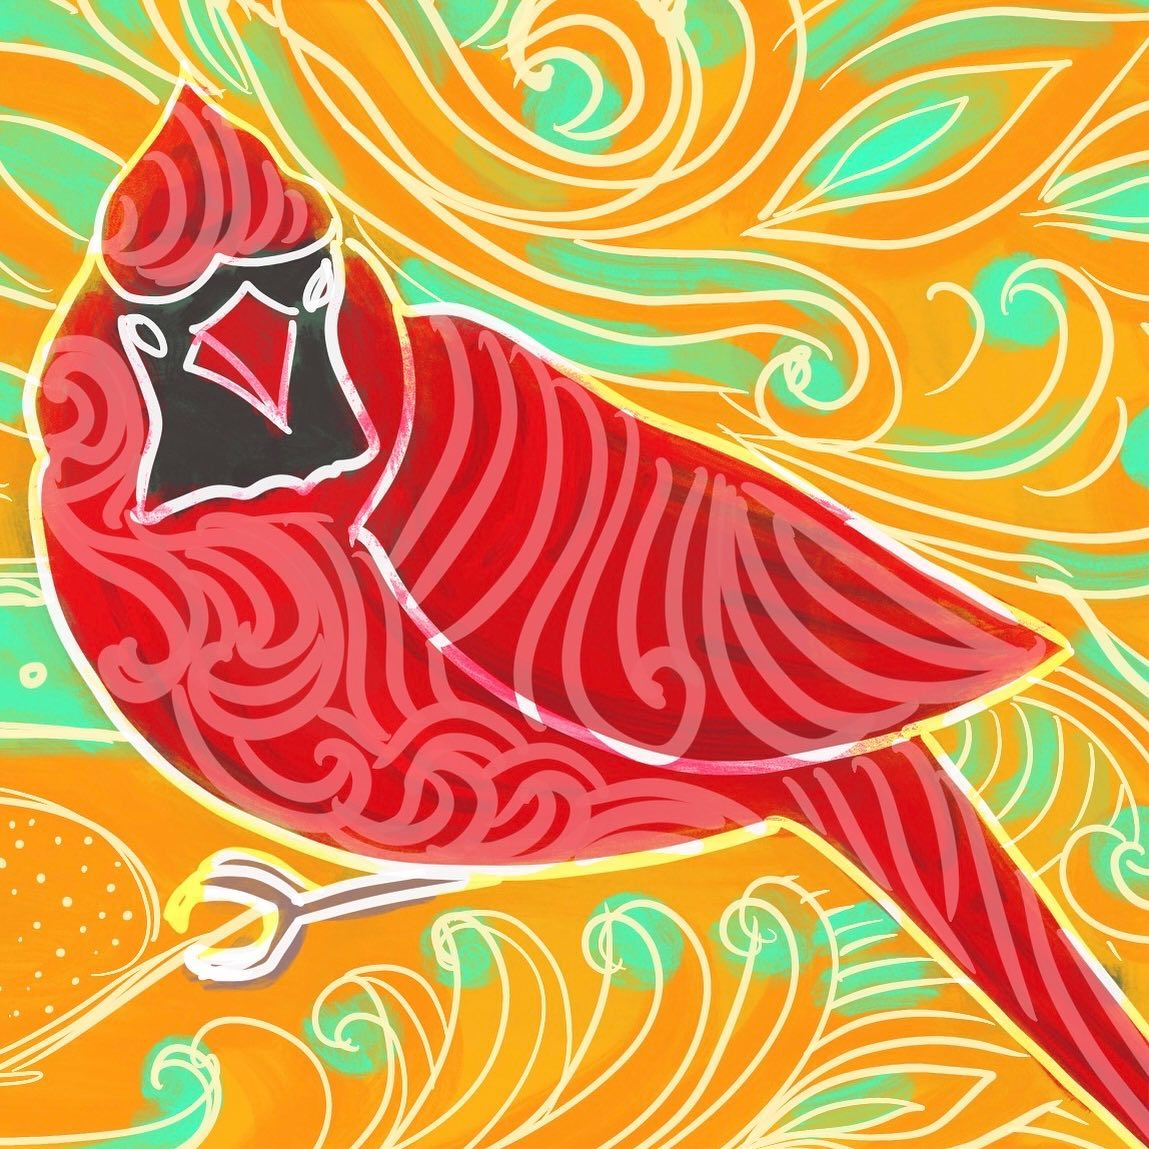 The weekend was mostly spent bird watching! Never realized there are so many different birds in my backyard. Cardinal is the favorite no doubt! Here's my take on a doodled version of the beautiful bird.